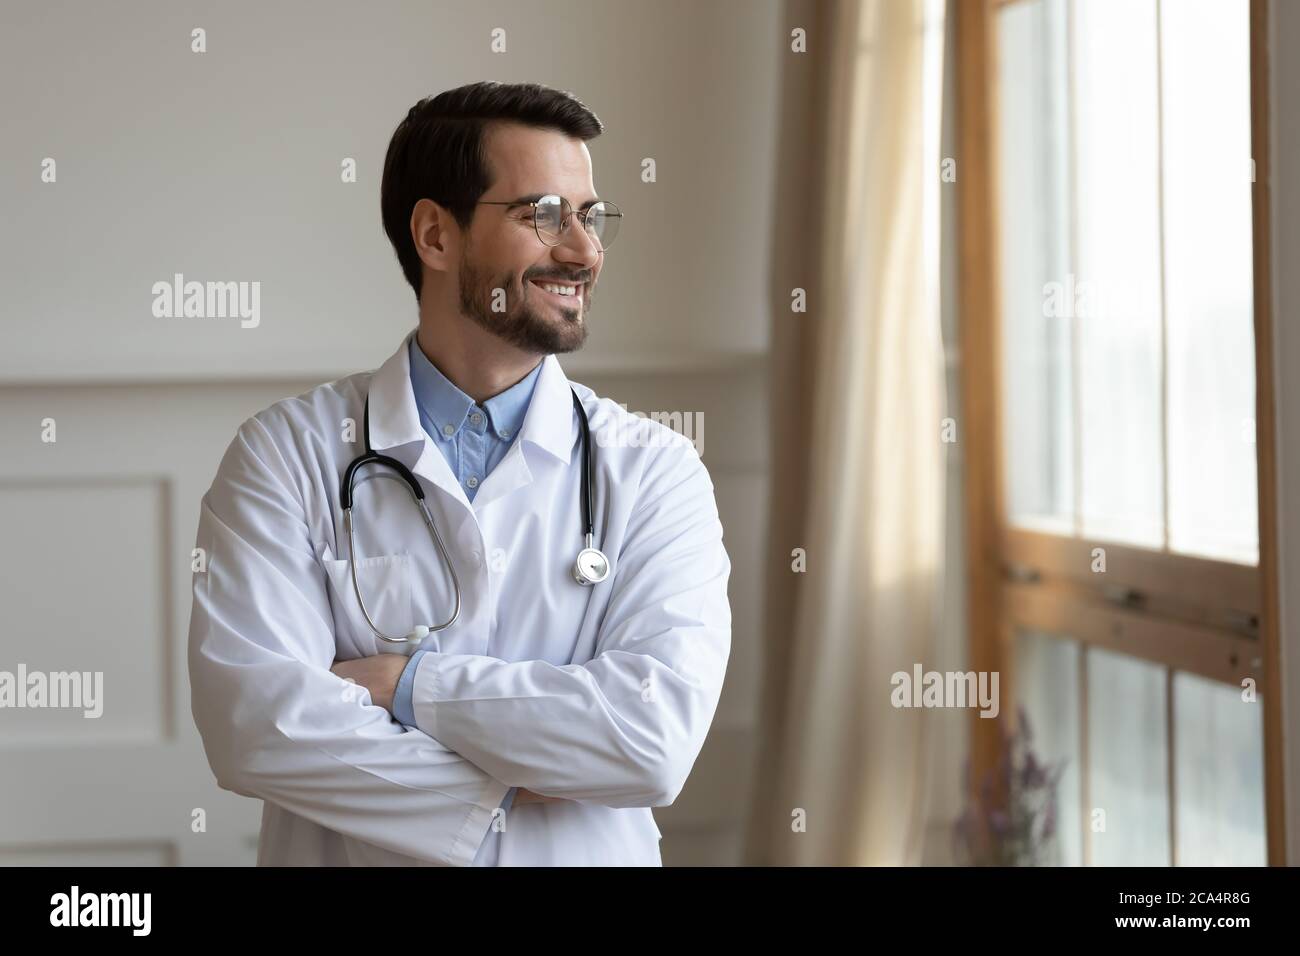 Smiling young doctor planning future career, standing near window. Stock Photo